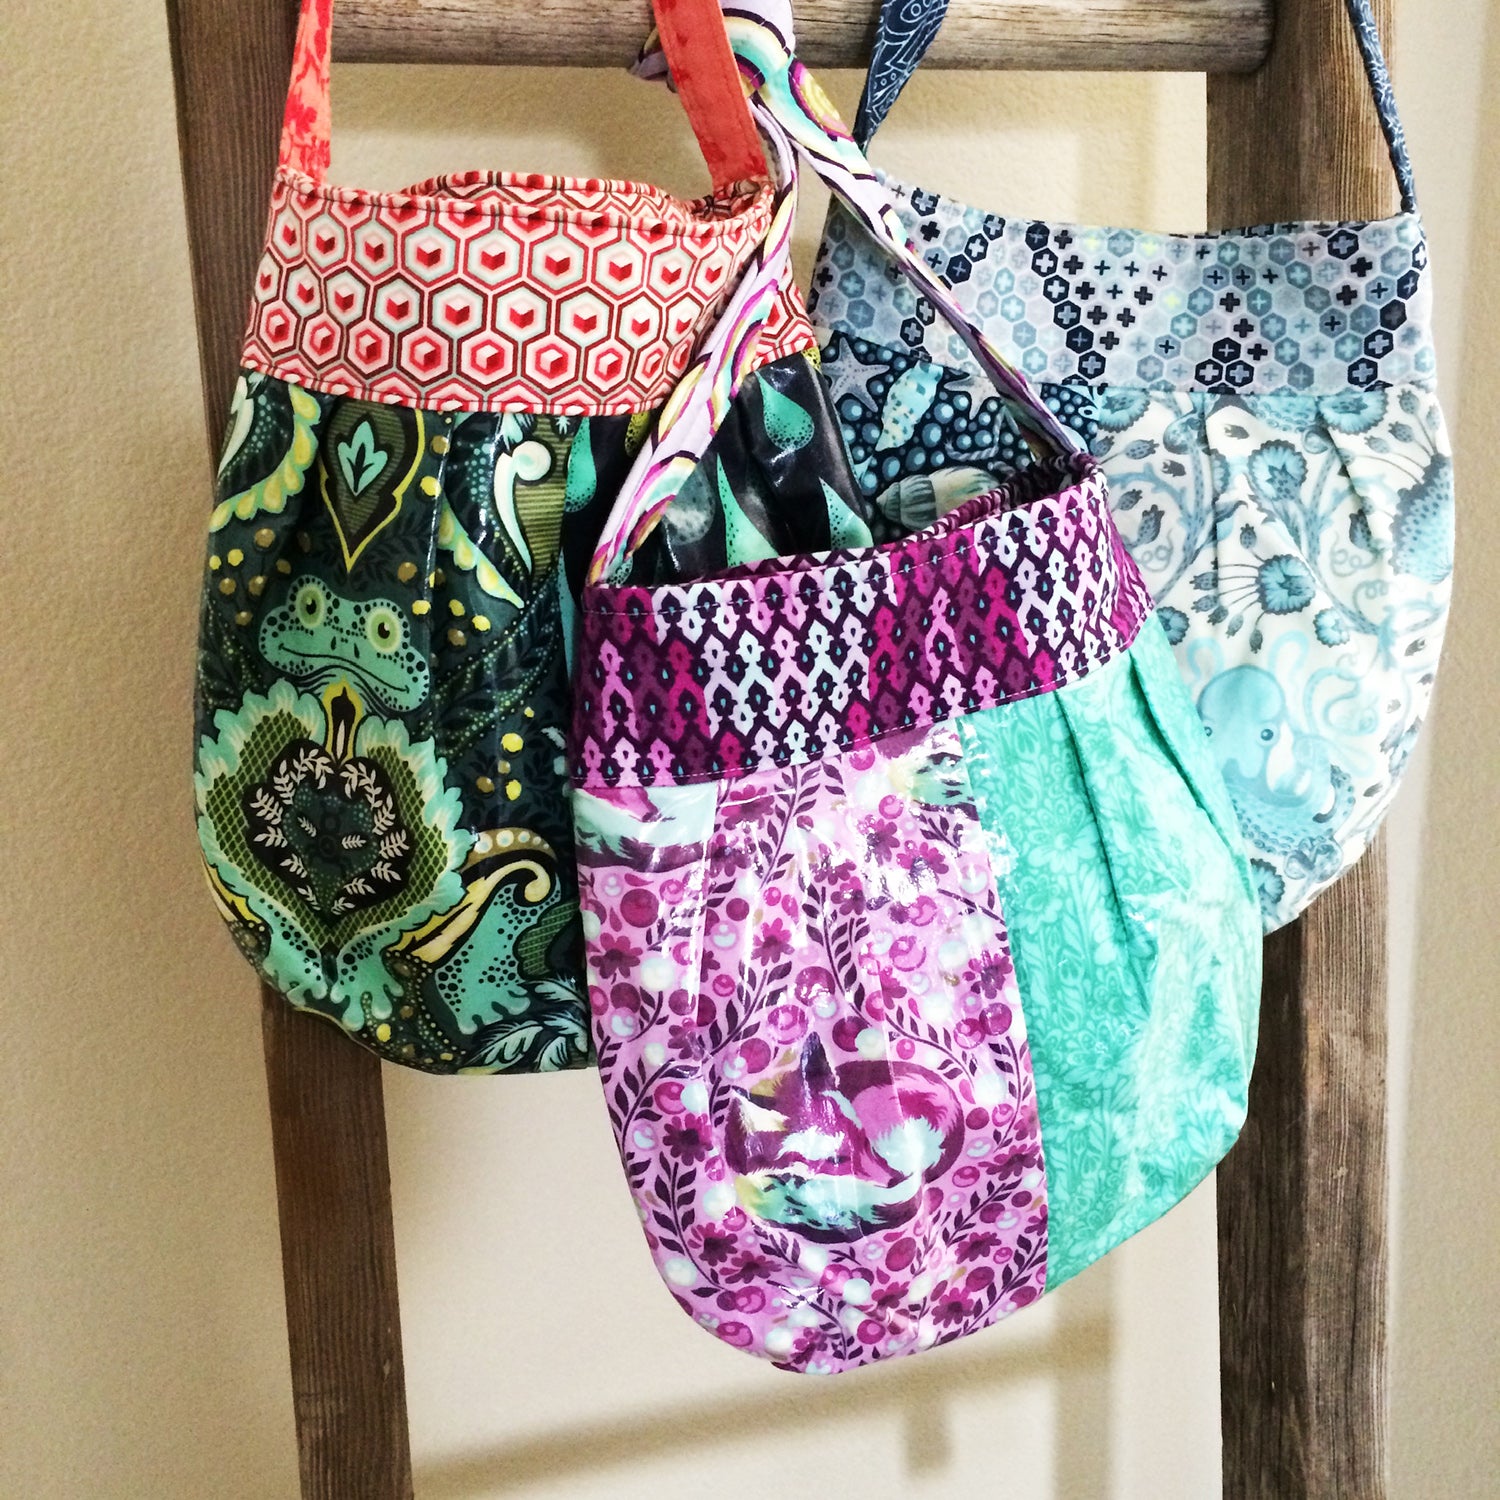 How to Sew a Tote Bag the Easy Way | Free Pattern